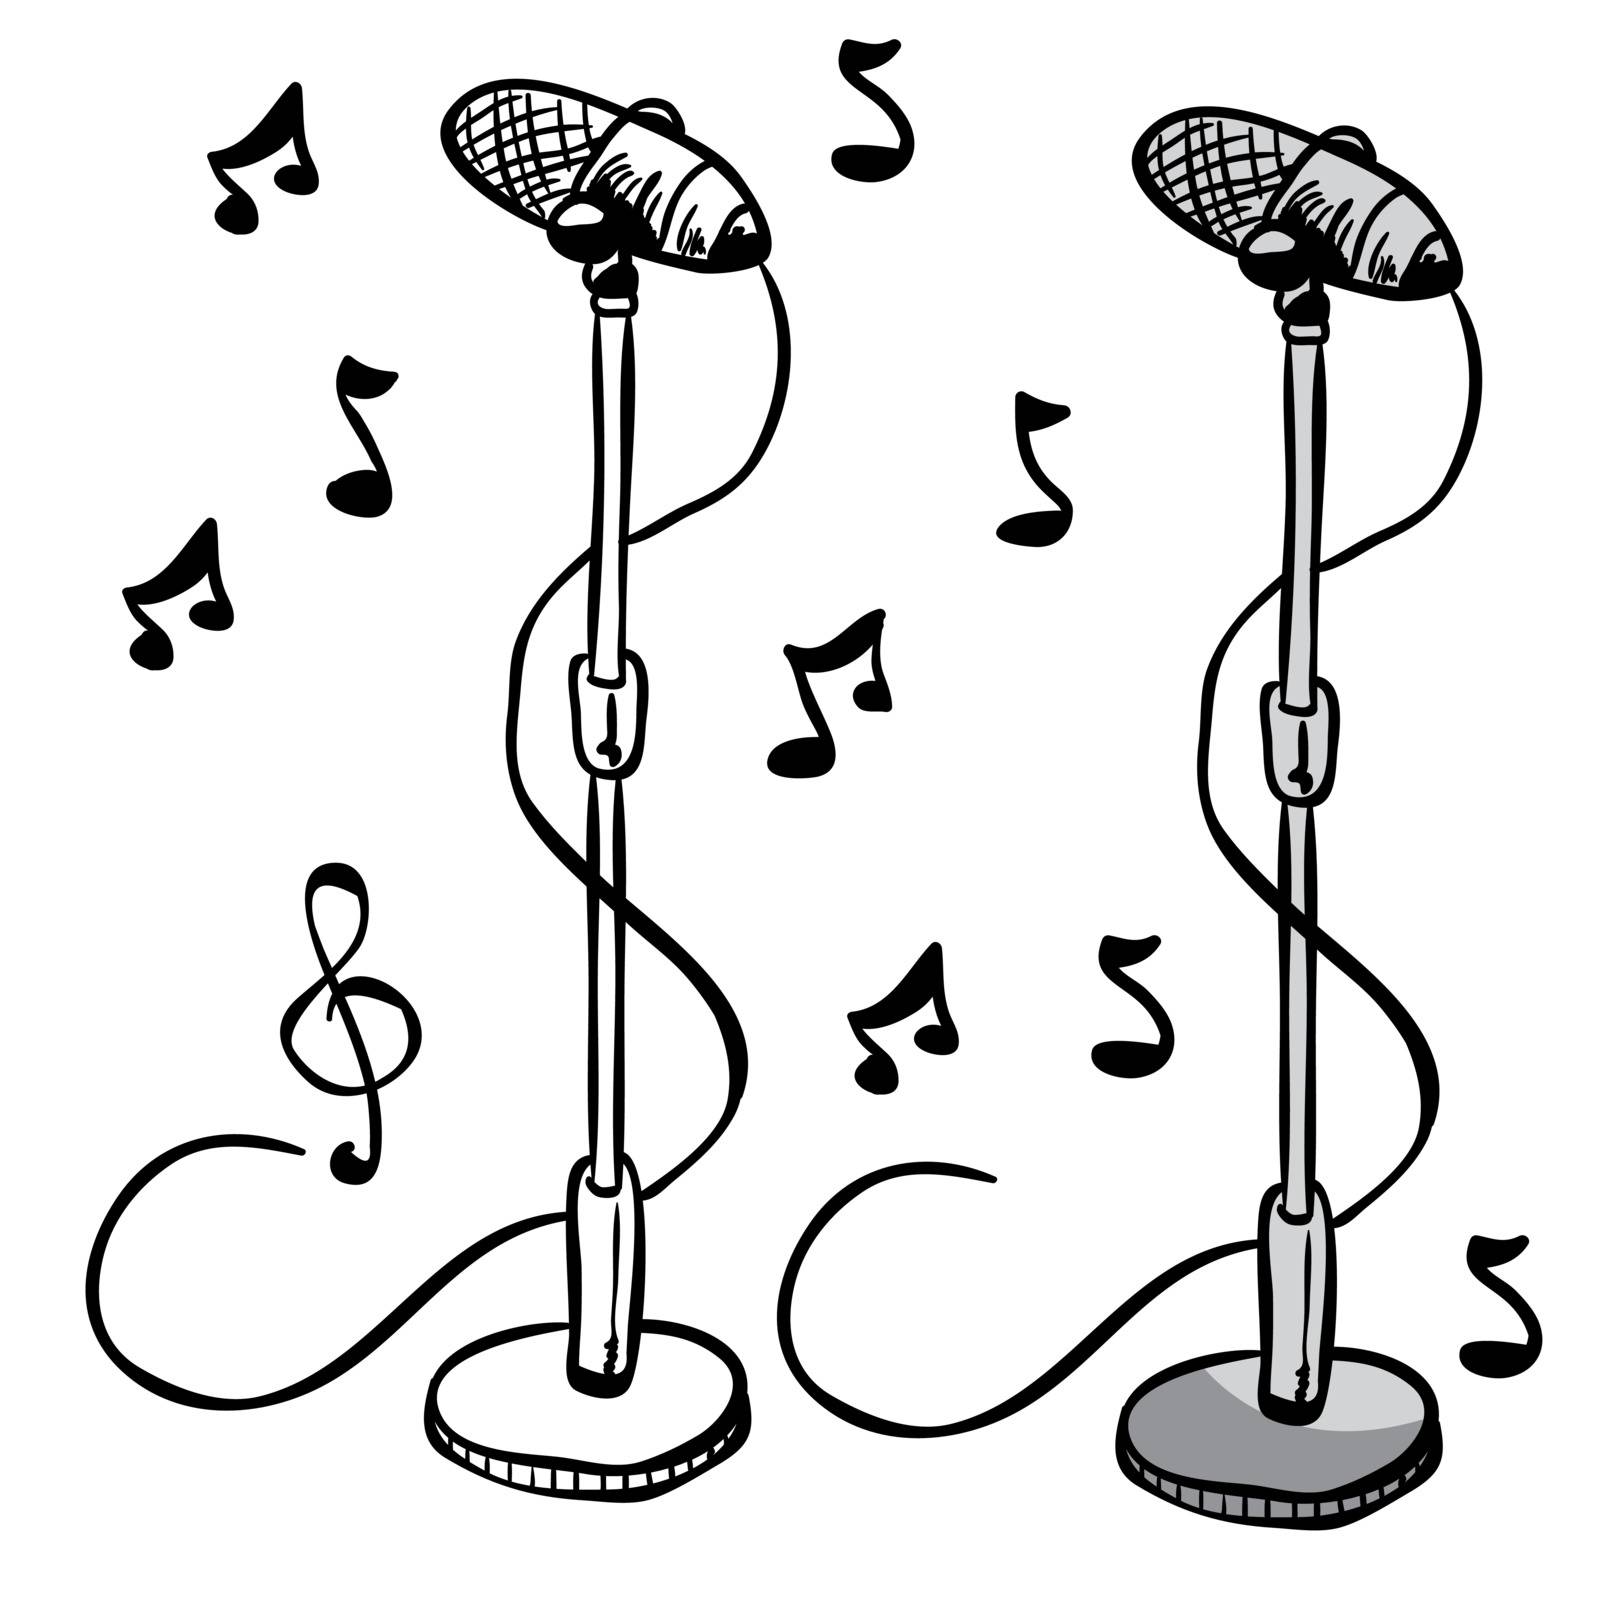 microphone on a stand with notes cartoon doodle